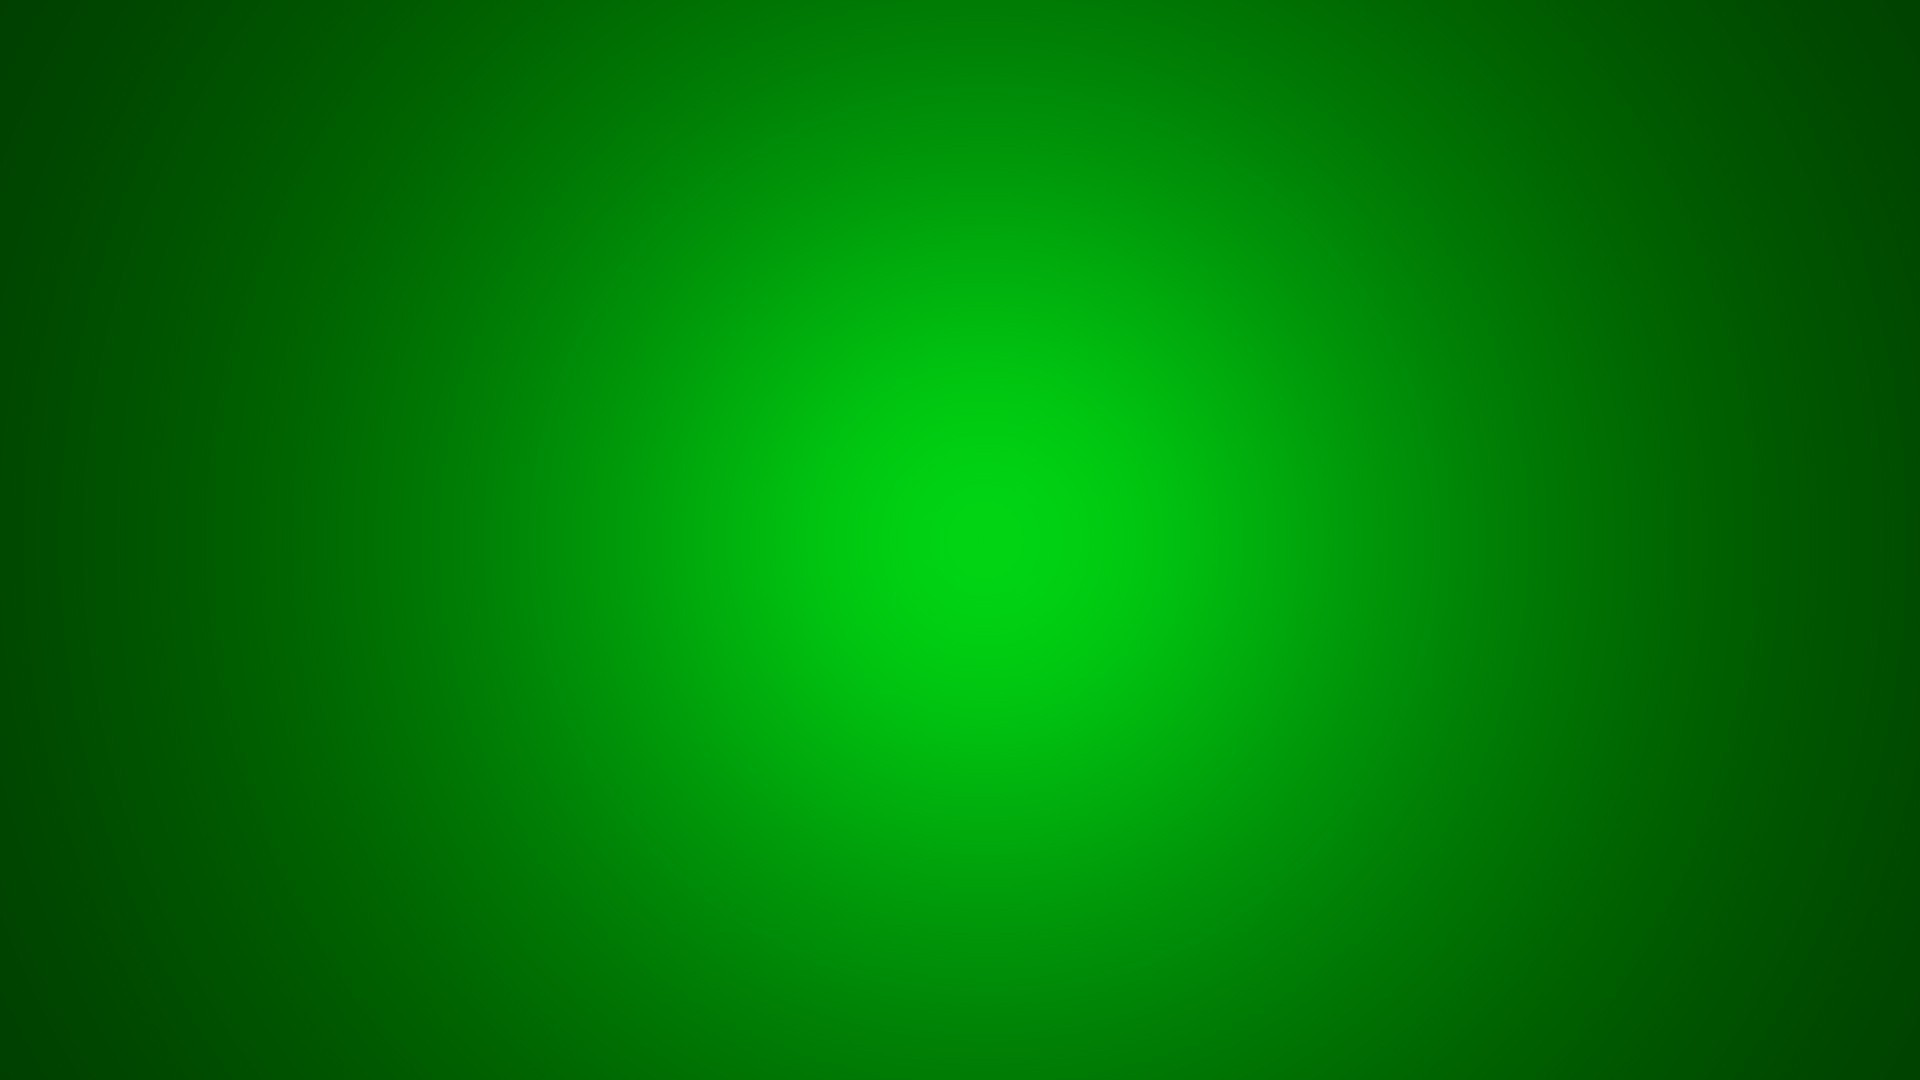 HD Wallpaper Neon Green With Resolution 1920X1080 pixel. You can make this wallpaper for your Desktop Computer Backgrounds, Mac Wallpapers, Android Lock screen or iPhone Screensavers